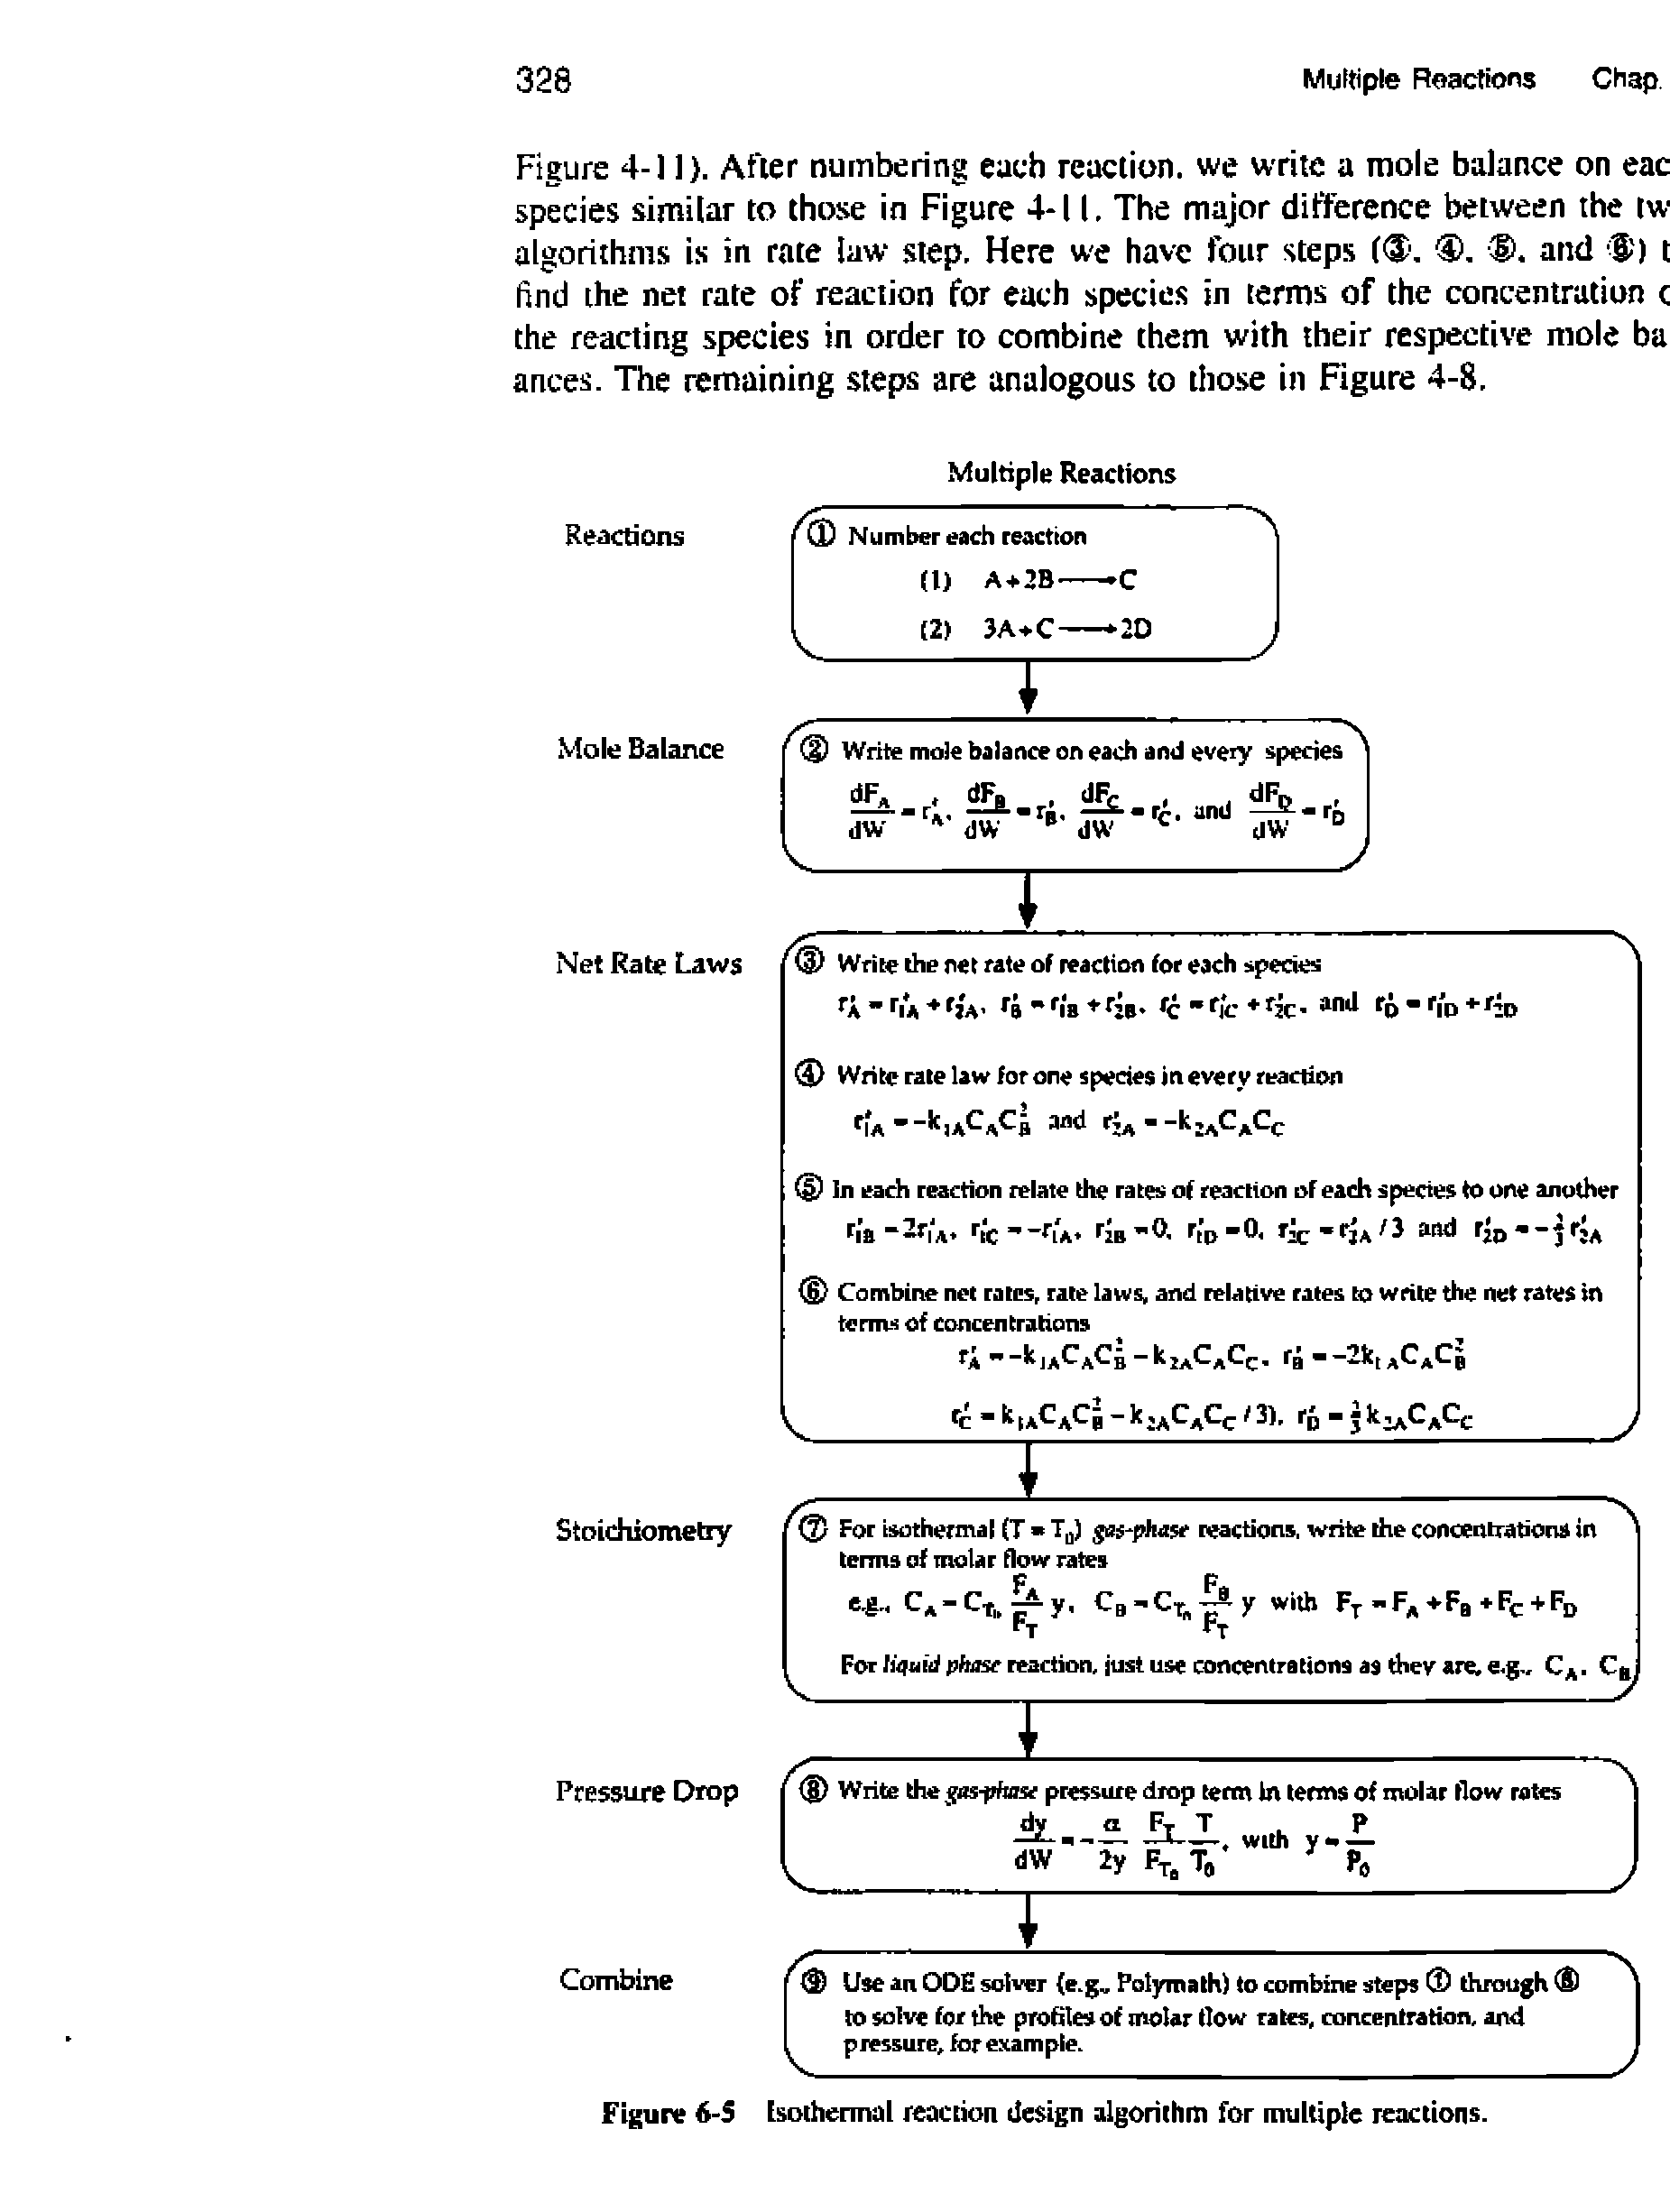 Figure 4-11). After numbering each reaction, we write a mole balance on eac species similar to those in Figure 4-11. The major difference between the iw algorithms is in rate law step. Here we have four steps ( , , . and ) t find the net rate of reaction for each species in terms of the concentration c the reacting species in order to combine them with their respective mole ba ances. The remaining steps are analogous to those in Figure 4-8.